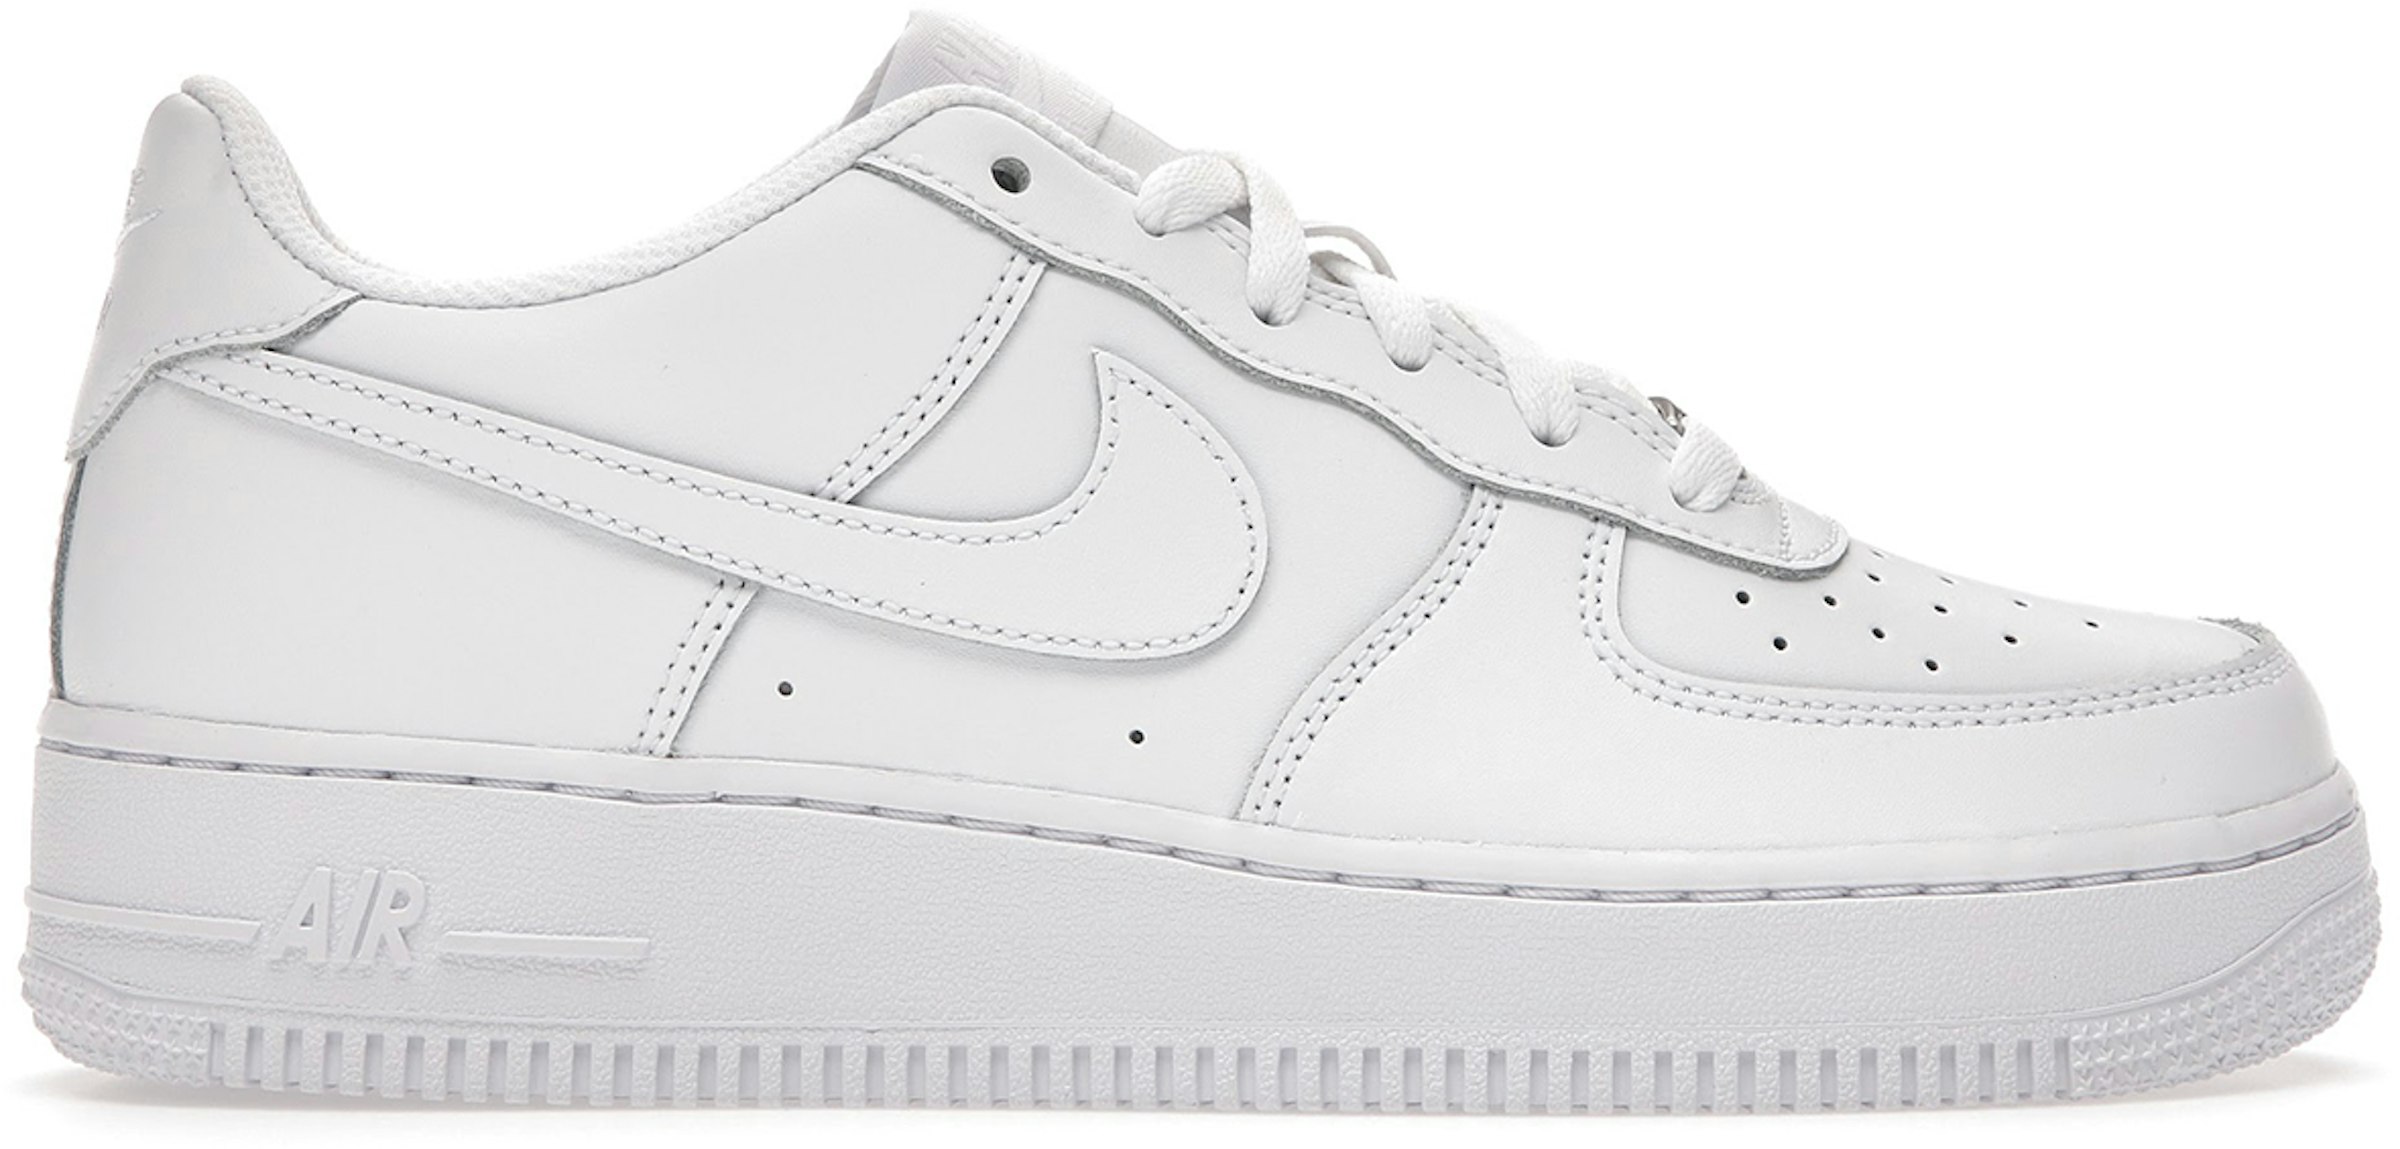 Nike Force Low White (GS) Kids' - DH2920-111 - US